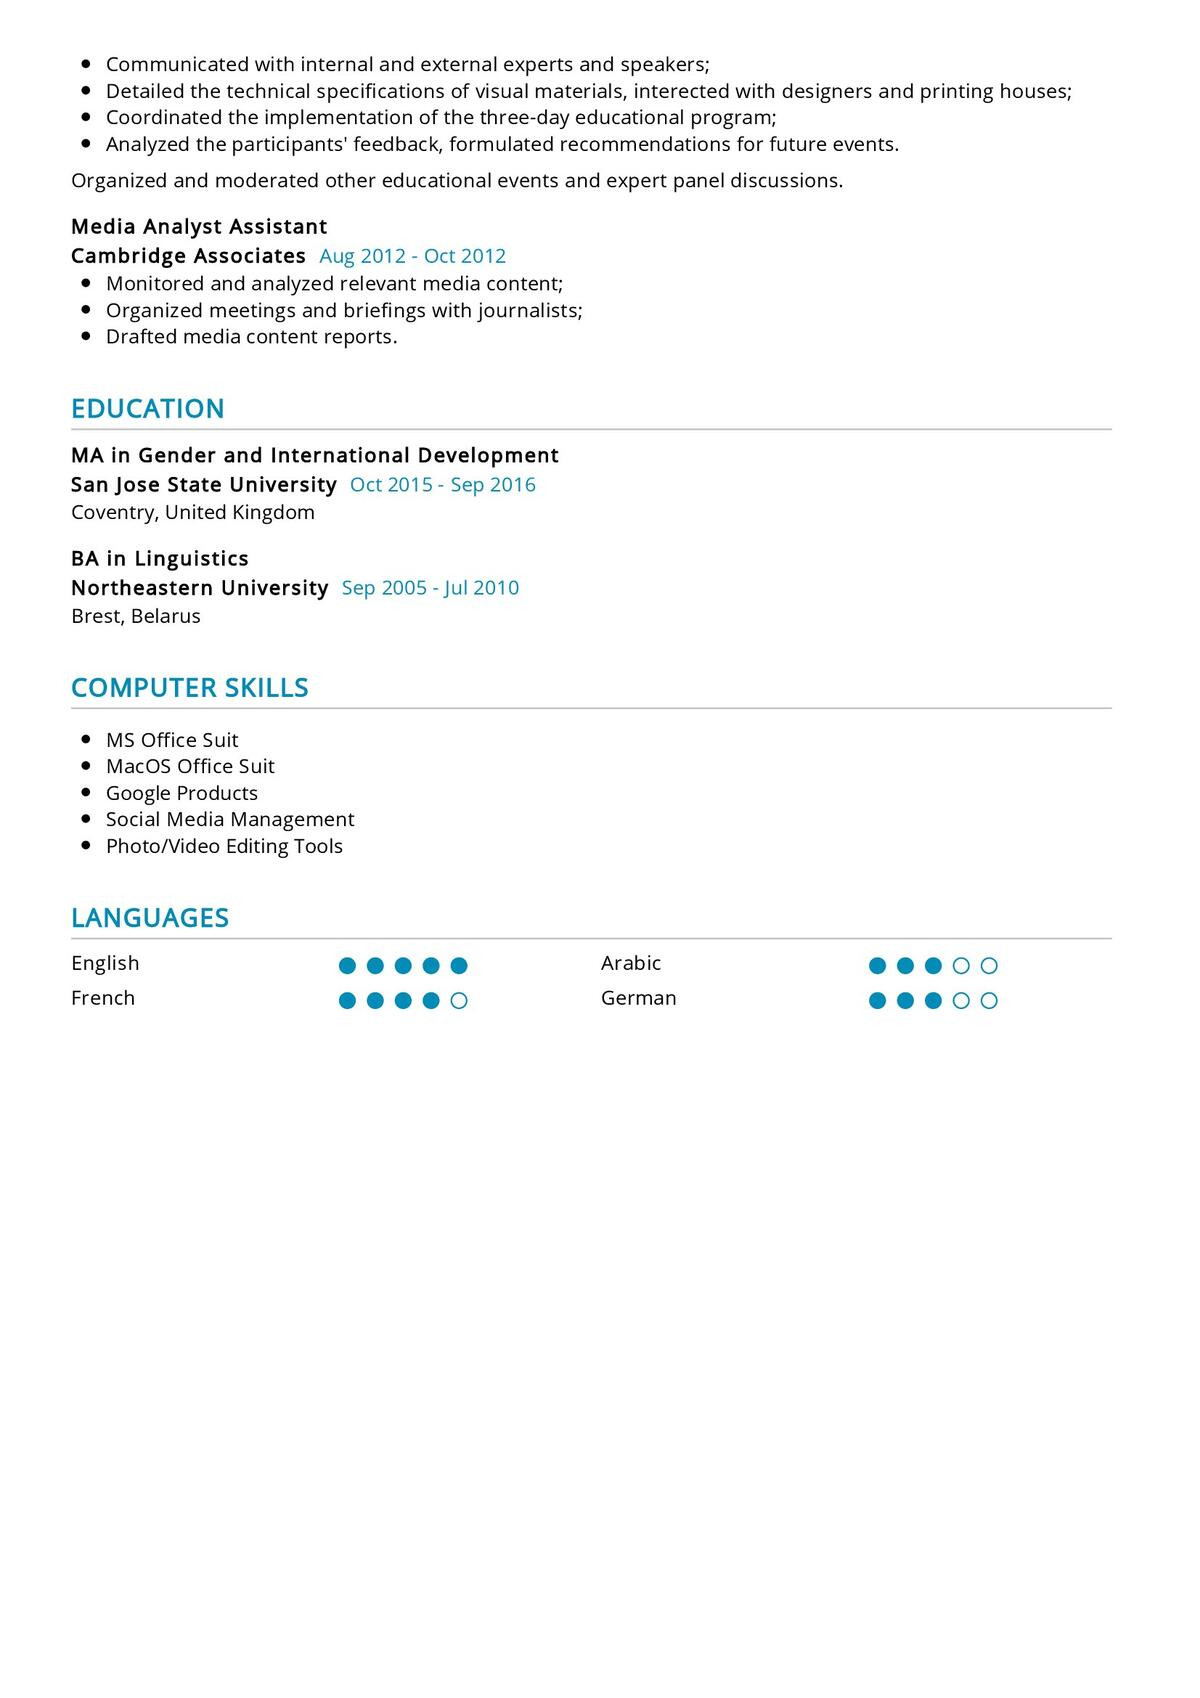 Learning and Development Manager Resume Samples Learning and Development Manager Resume 2021 Writing Guide …